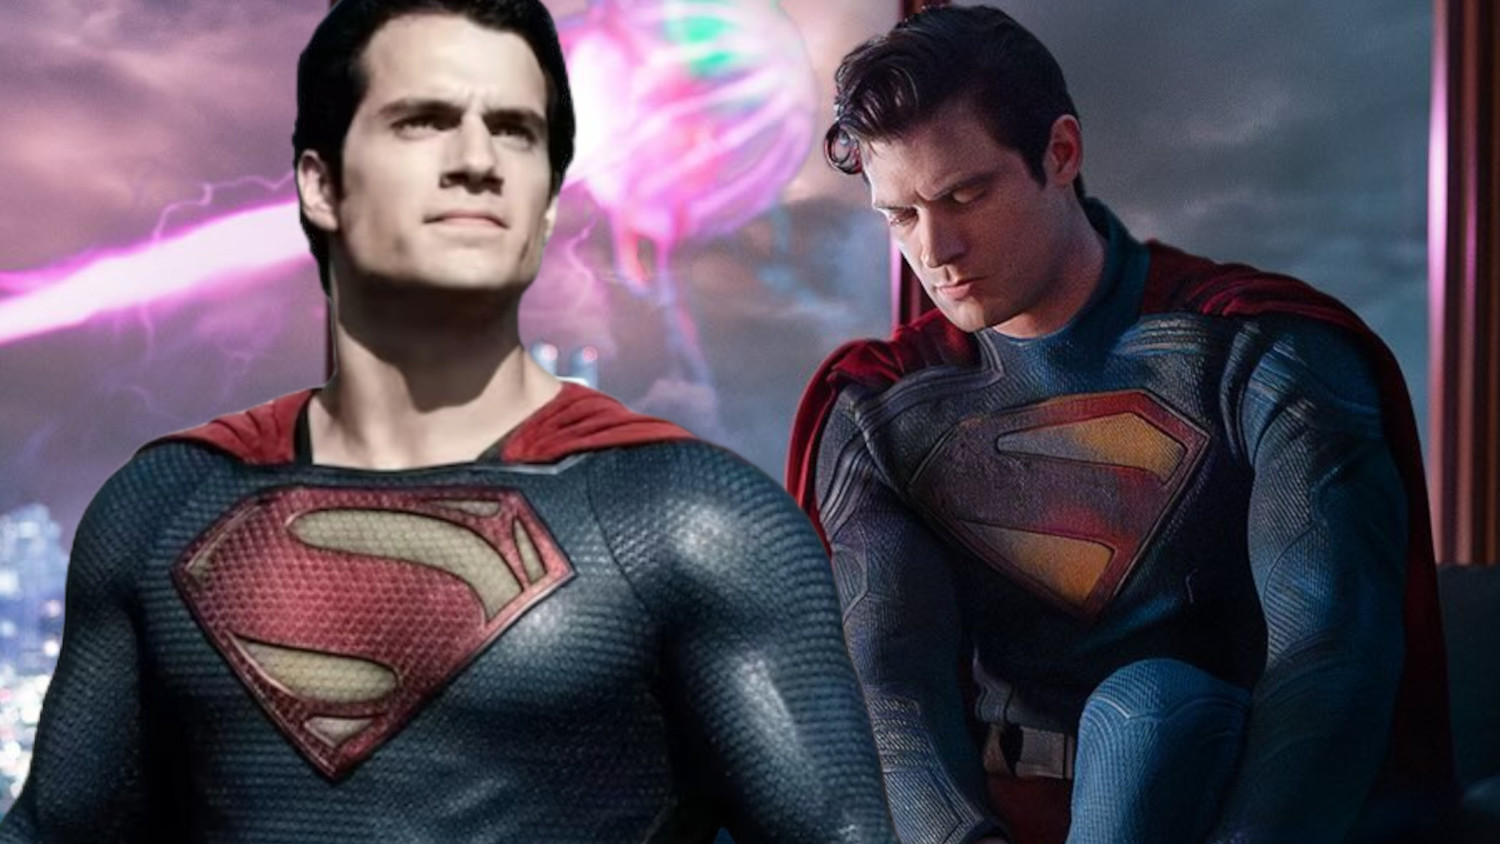 Fans React To James Gunn’s Superman With Super Memes